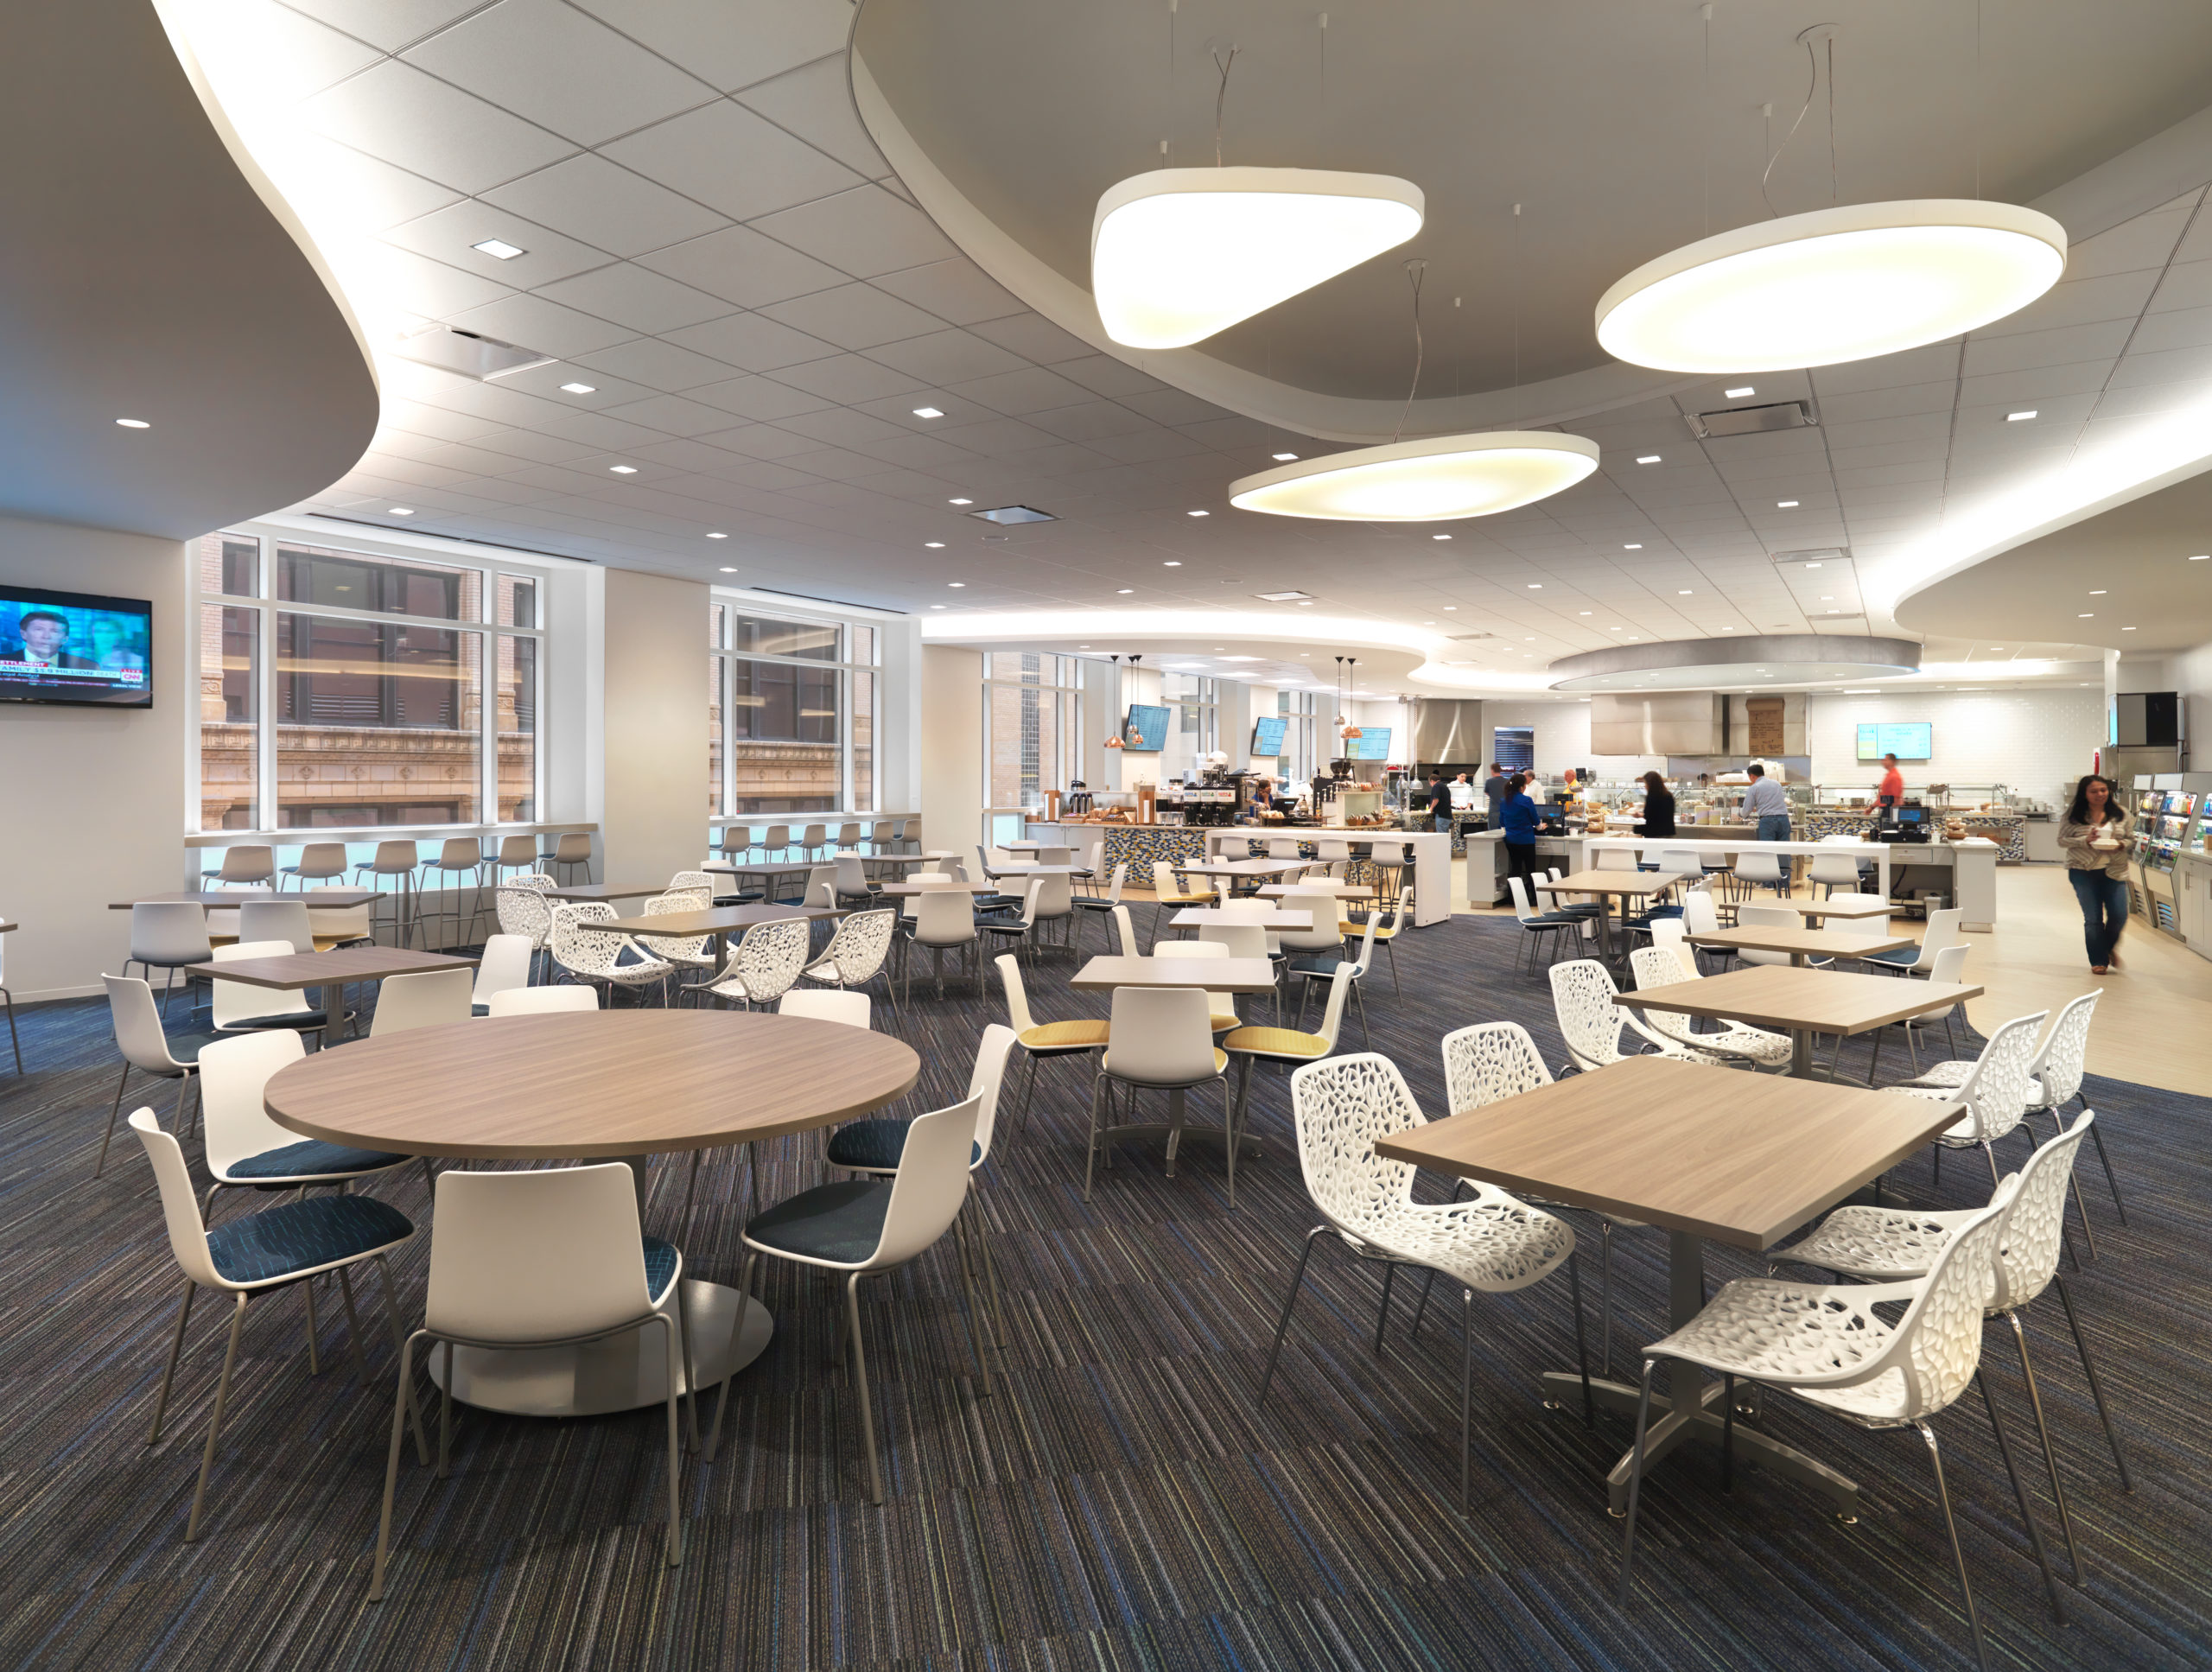 modern project lighting design in cafeteria